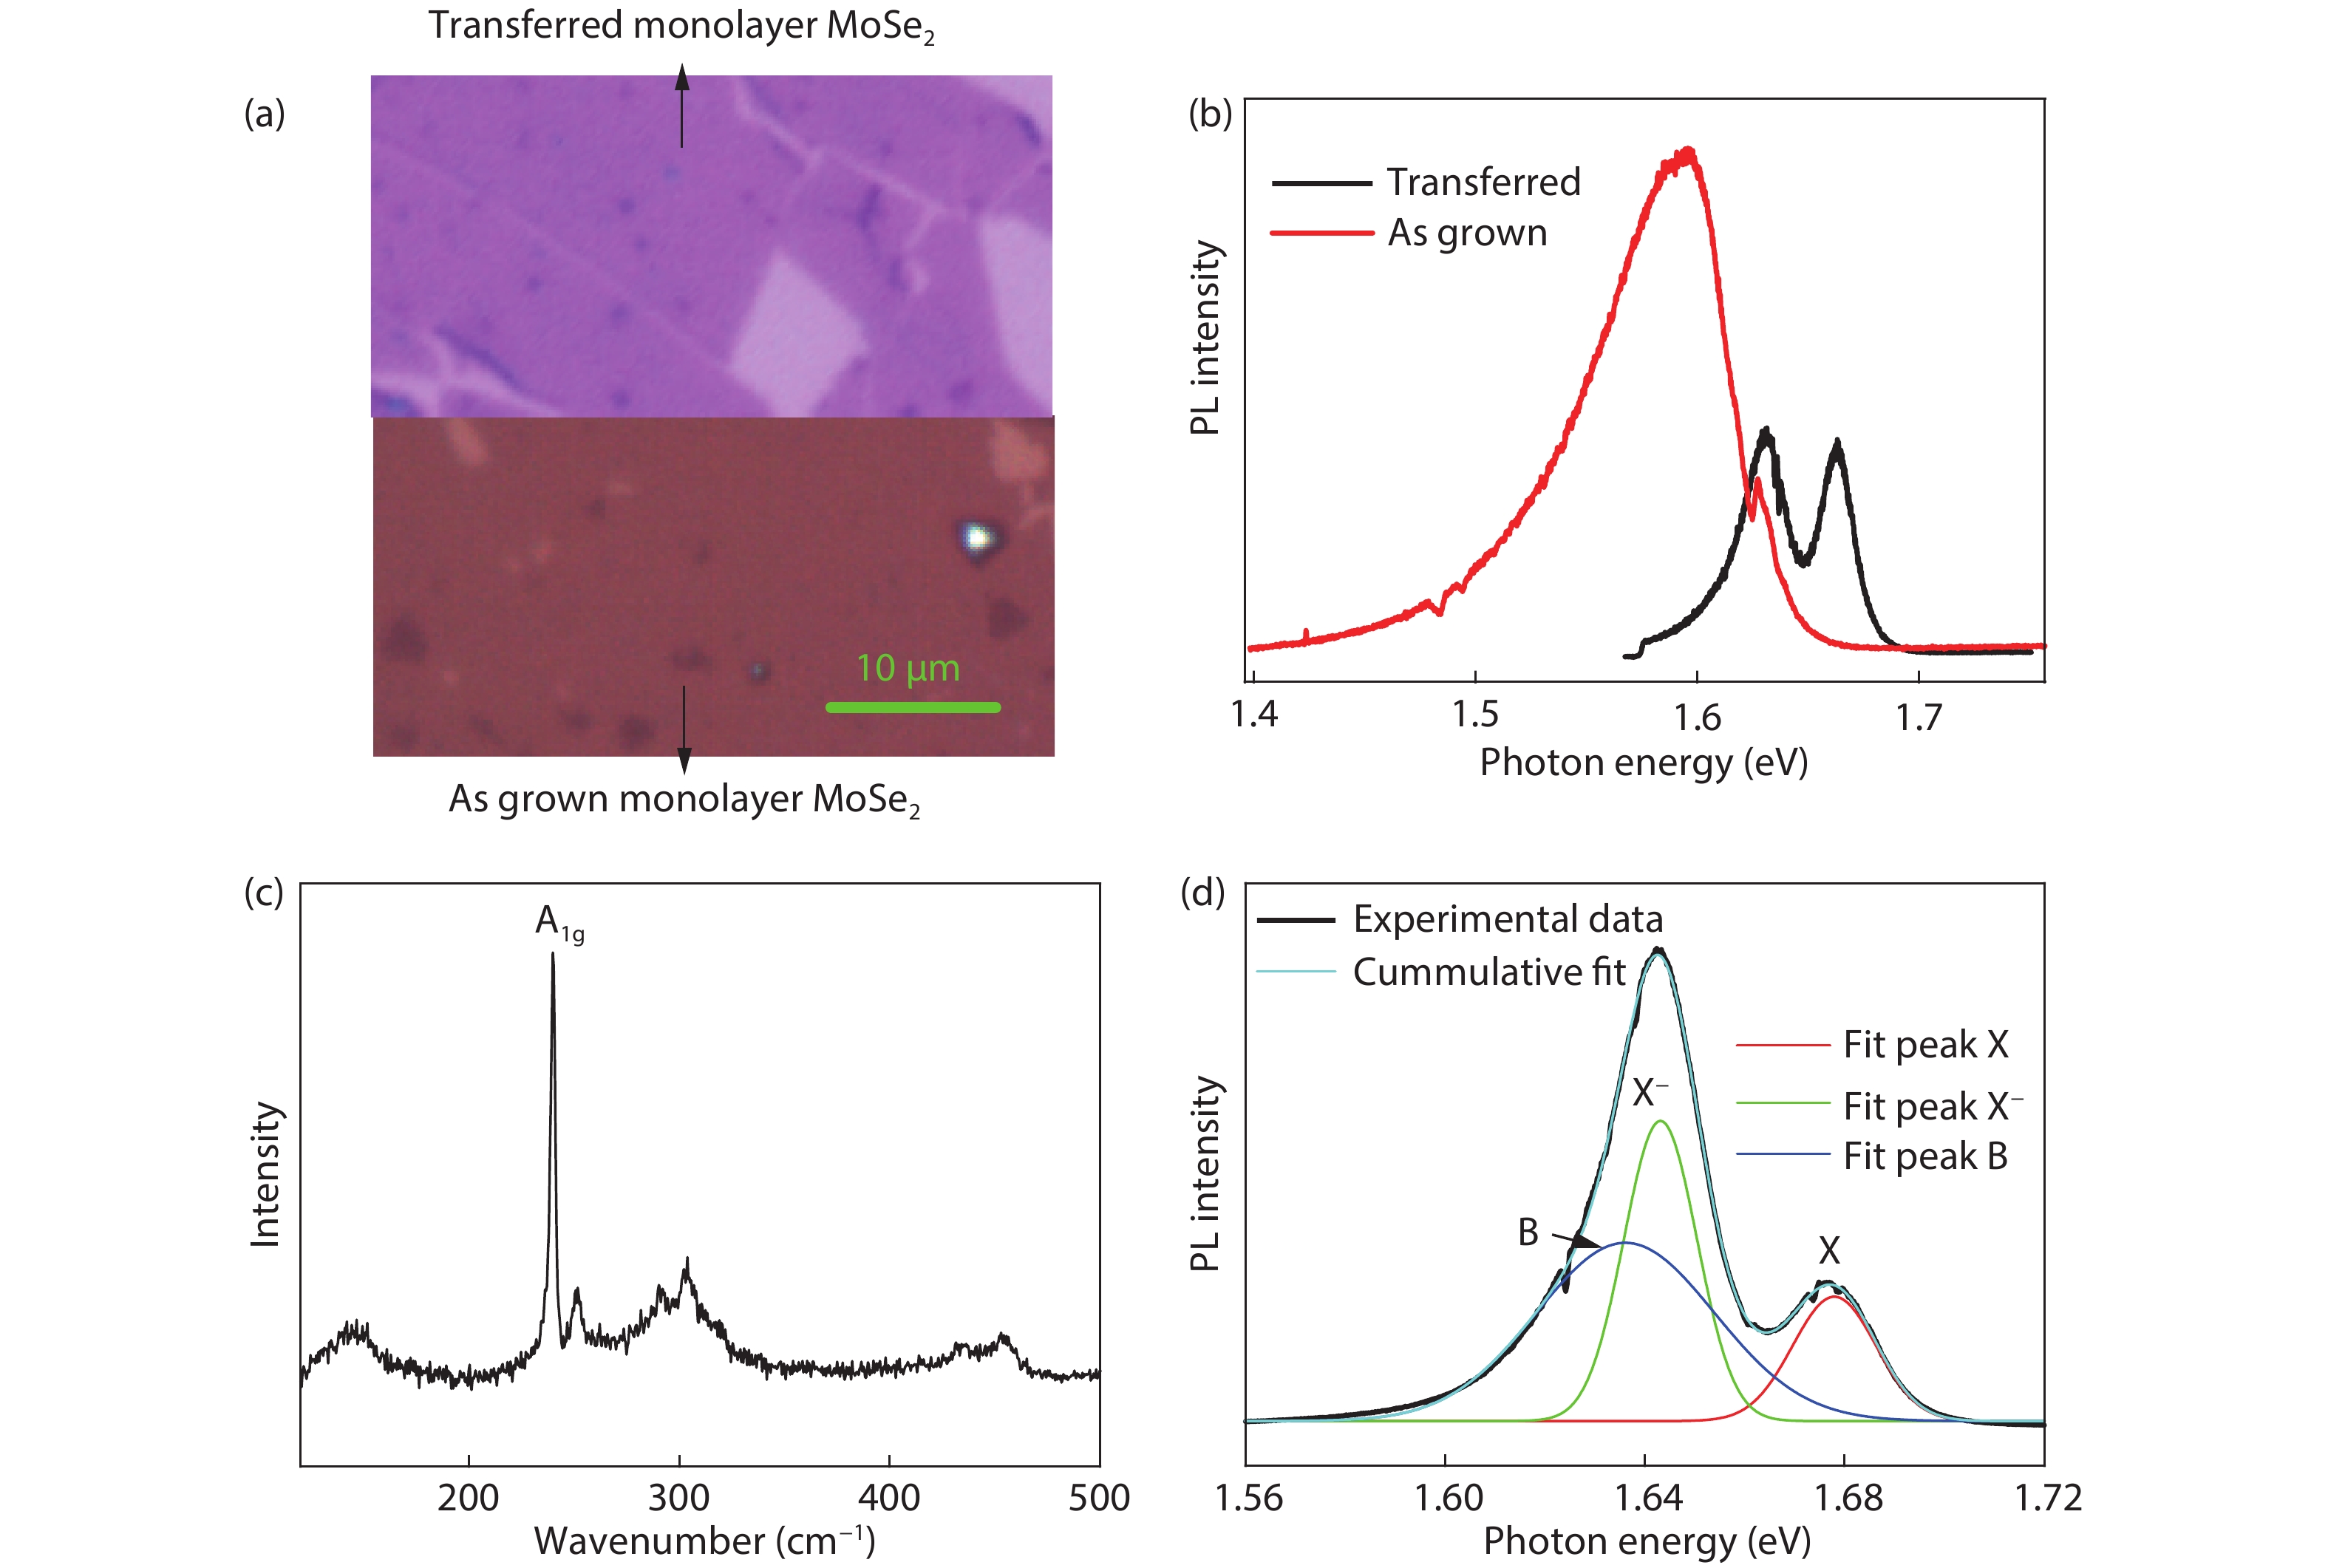 (Color online) (a) Micrograph of transferred monolayer MoSe2 sample (upper part) and as grown monolayer MoSe2 sample (lower part). (b) PL spectra of monolayer MoSe2 measured at 6 K for as grown (red line) and after transferring to a SiO2/Si substrate (black line). (c) Raman spectrum of the transferred sample. (d) PL spectrum of the transferred monolayer MoSe2 measured at an excitation power of 872 μW. The curve can be fitted by using three Gauss functions.